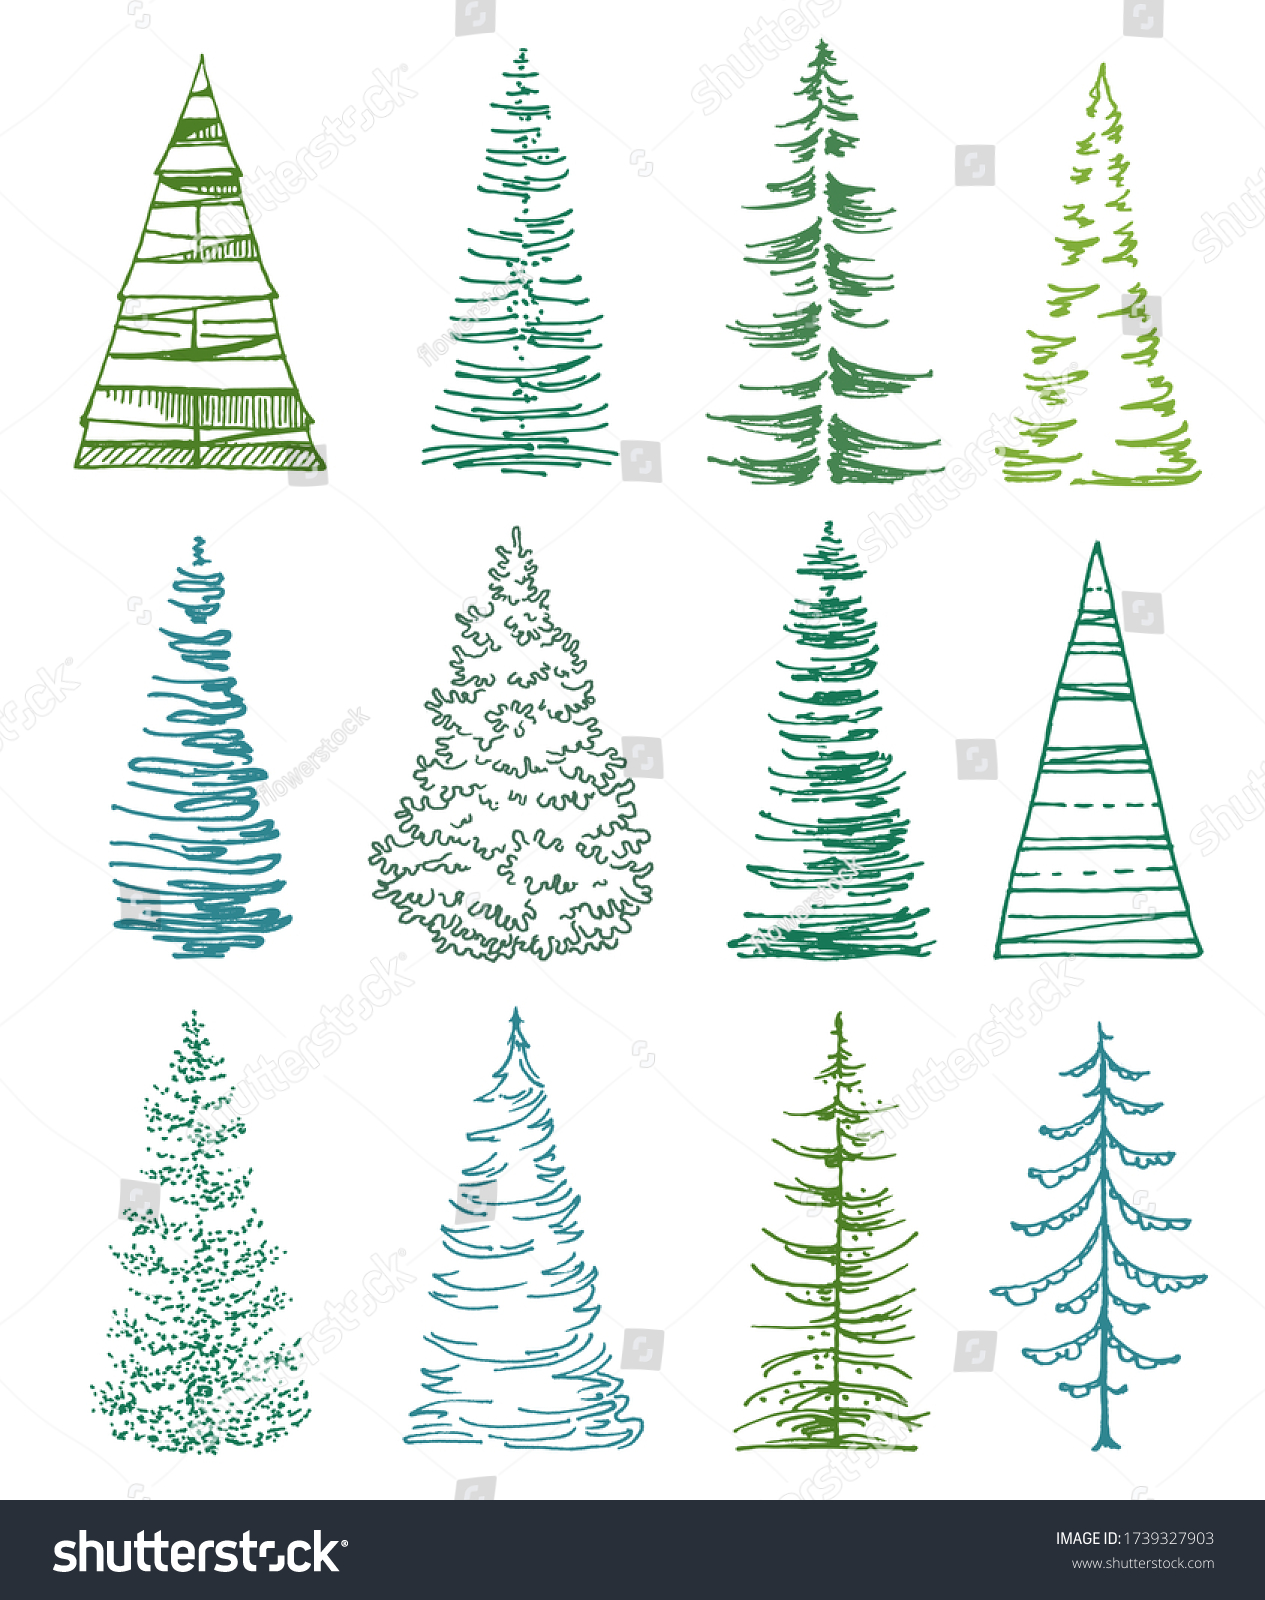 SVG of set of stylized fir trees on white. line art spruce trees with minimal design, various lines and shapes svg